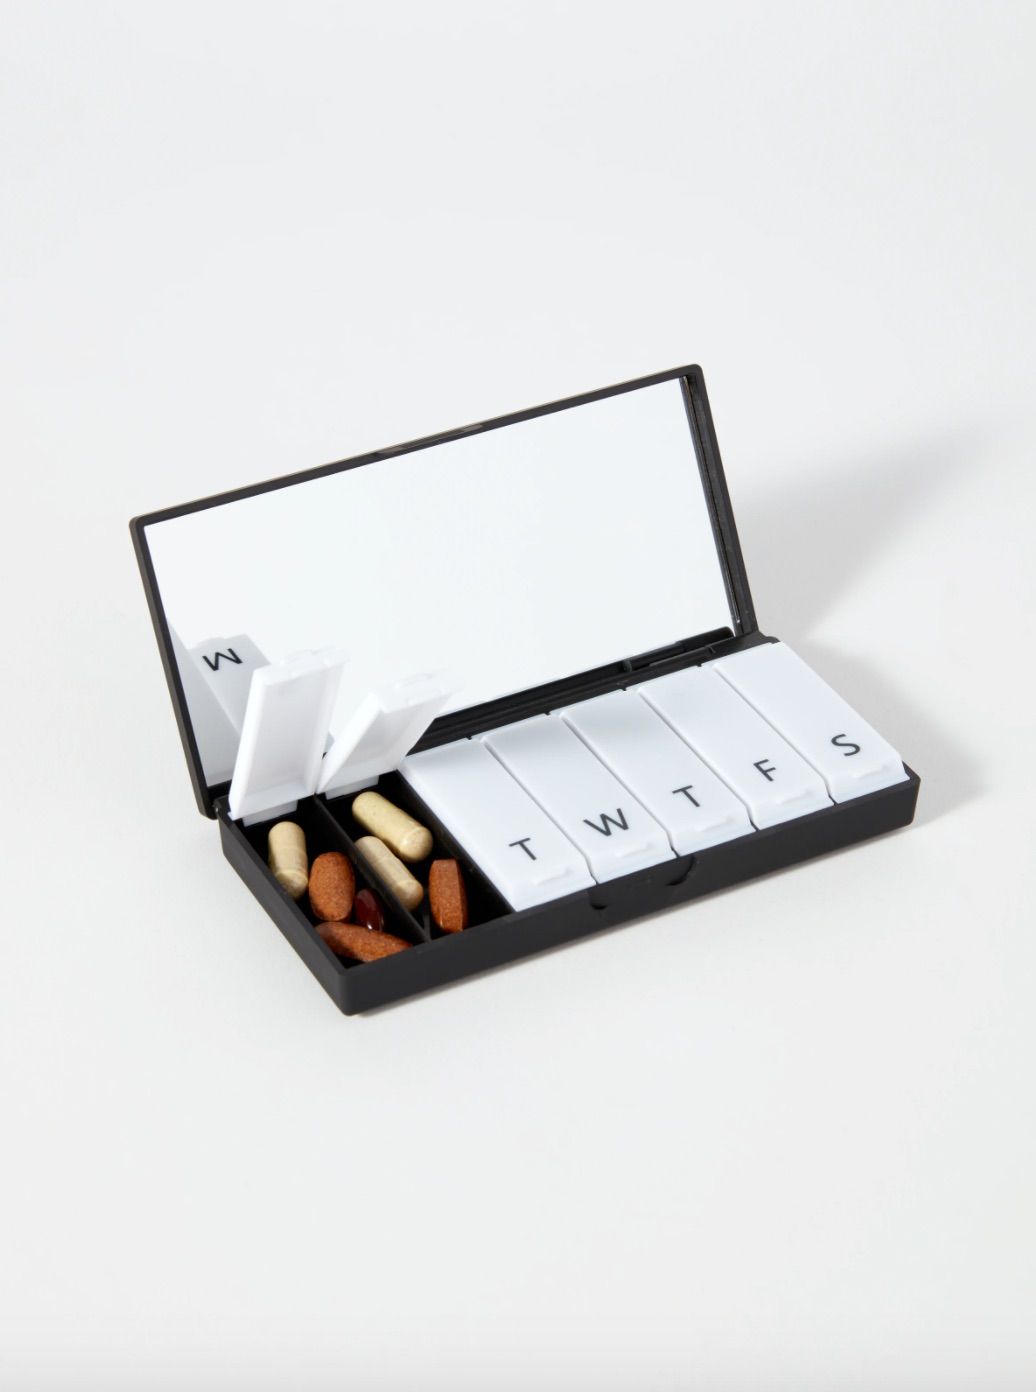 15 Best Pill Organizers And Boxes That Are Stylish, Per Reviews